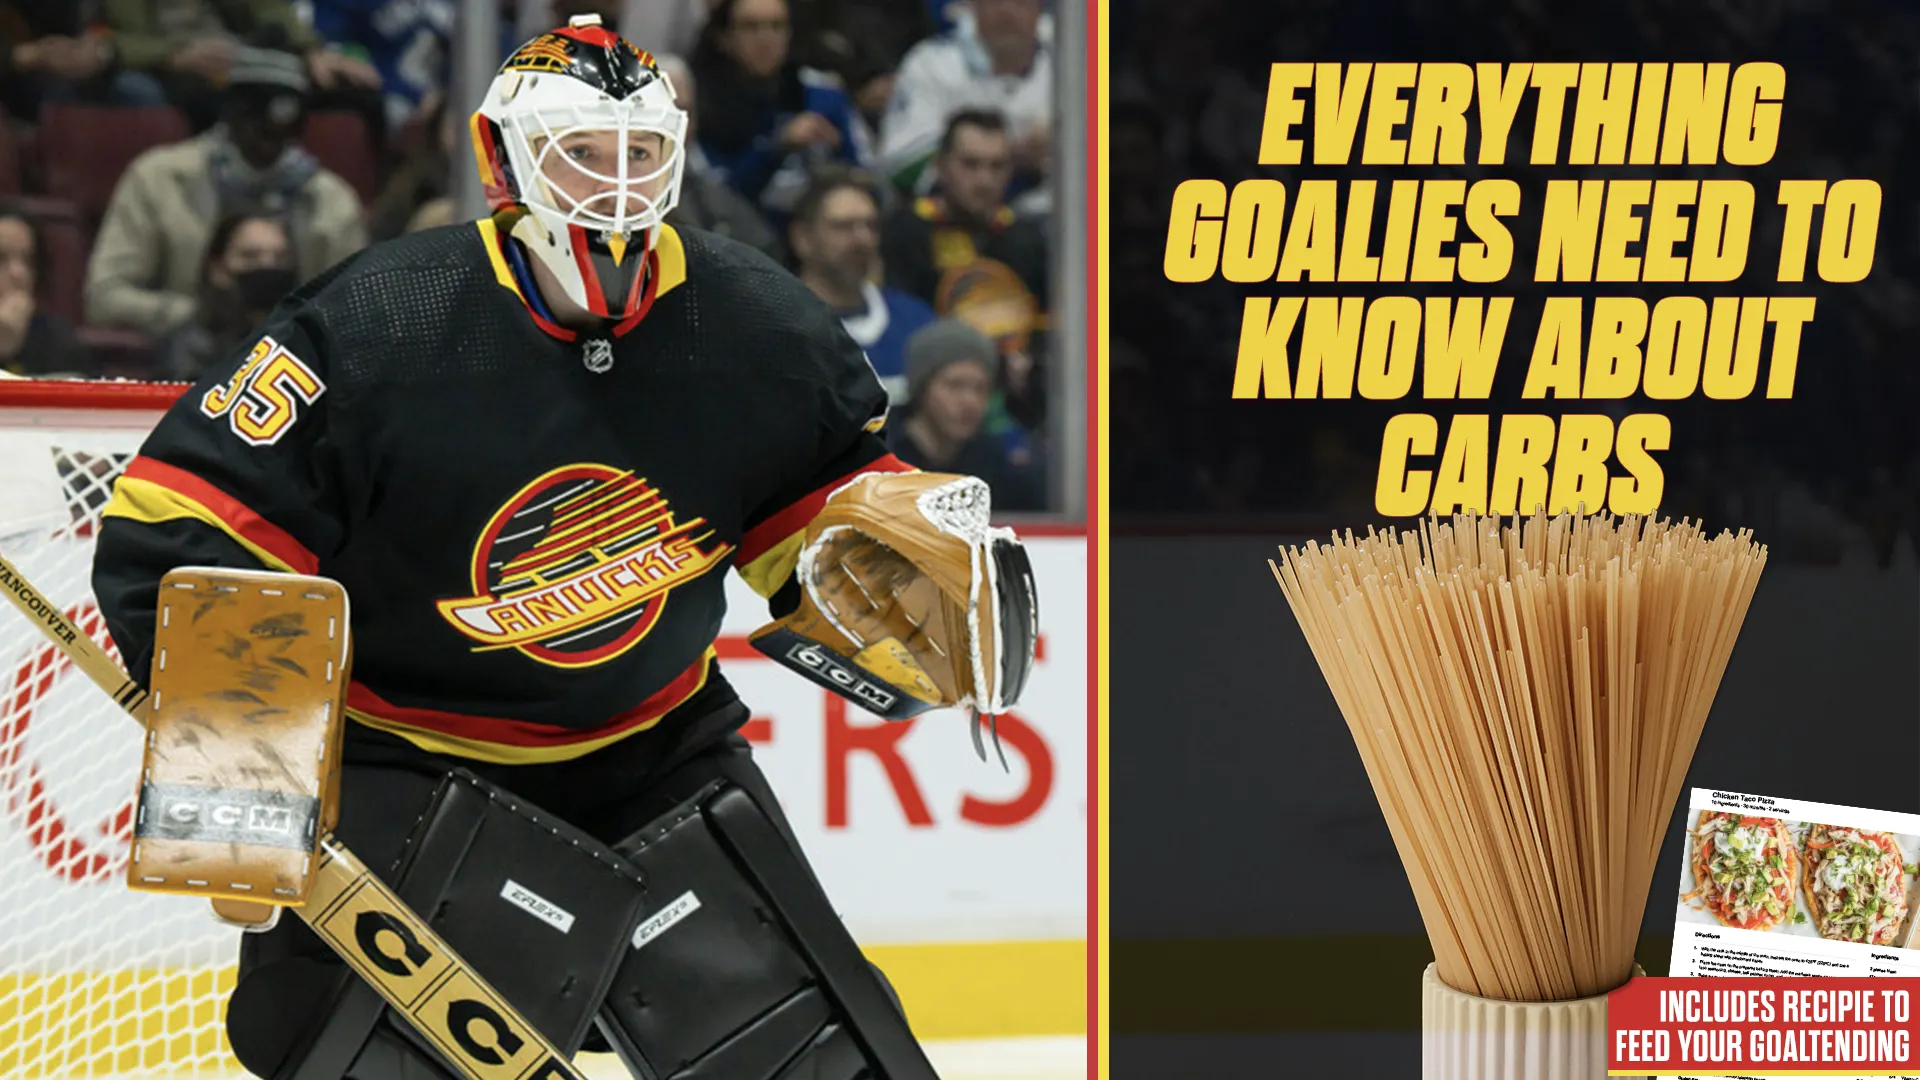 Everything Goalies Need to Know about Carbs